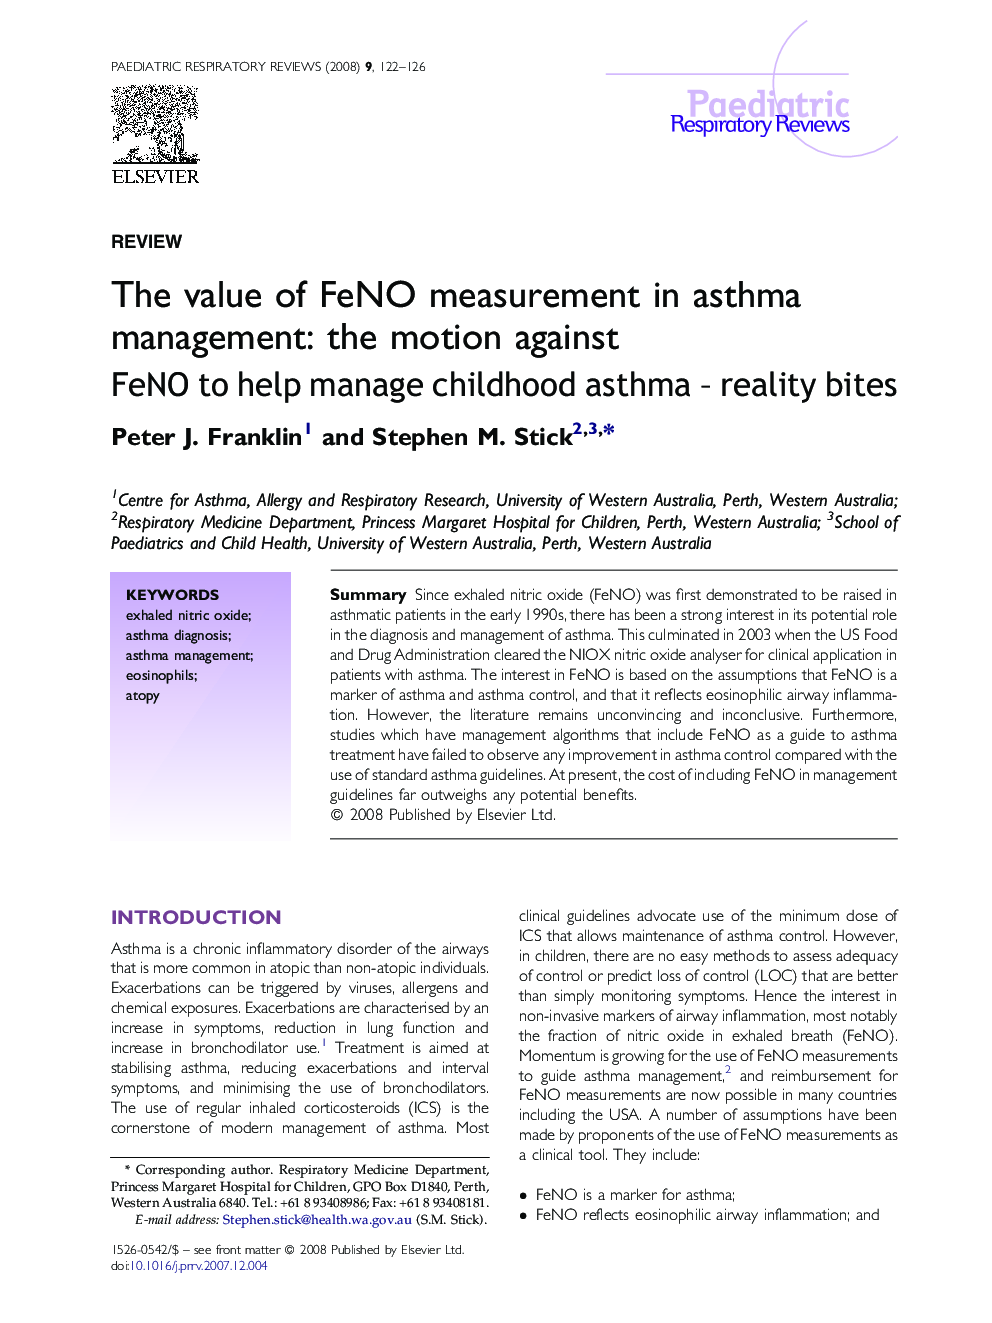 The value of FeNO measurement in asthma management: the motion against FeNO to help manage childhood asthma – reality bites